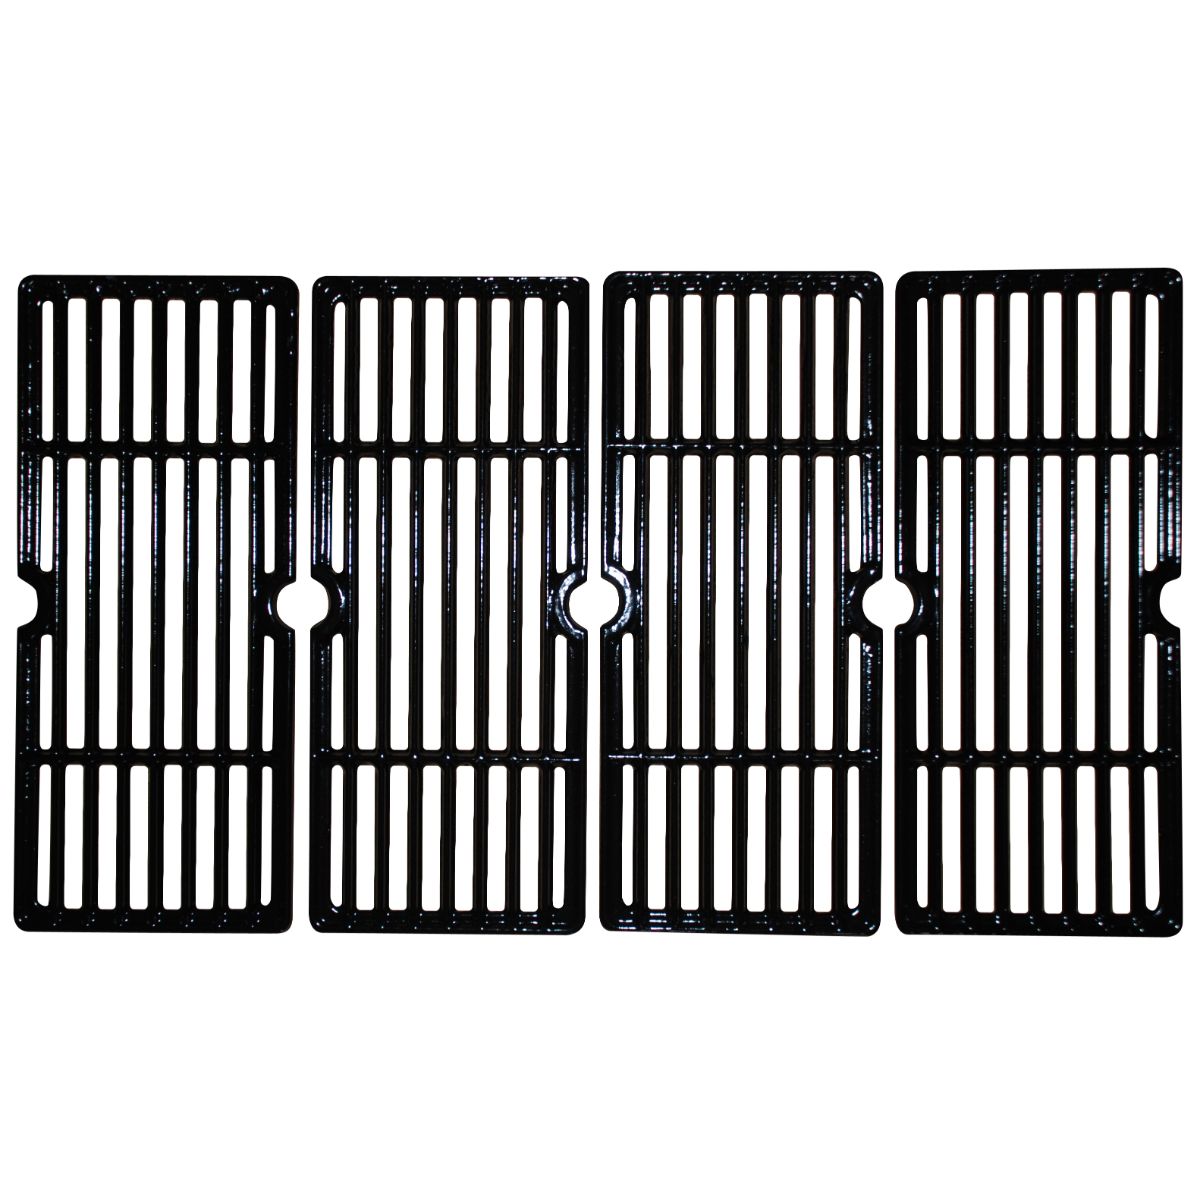 Gloss cast iron cooking grid for Charbroil, Master Forge brand gas grills